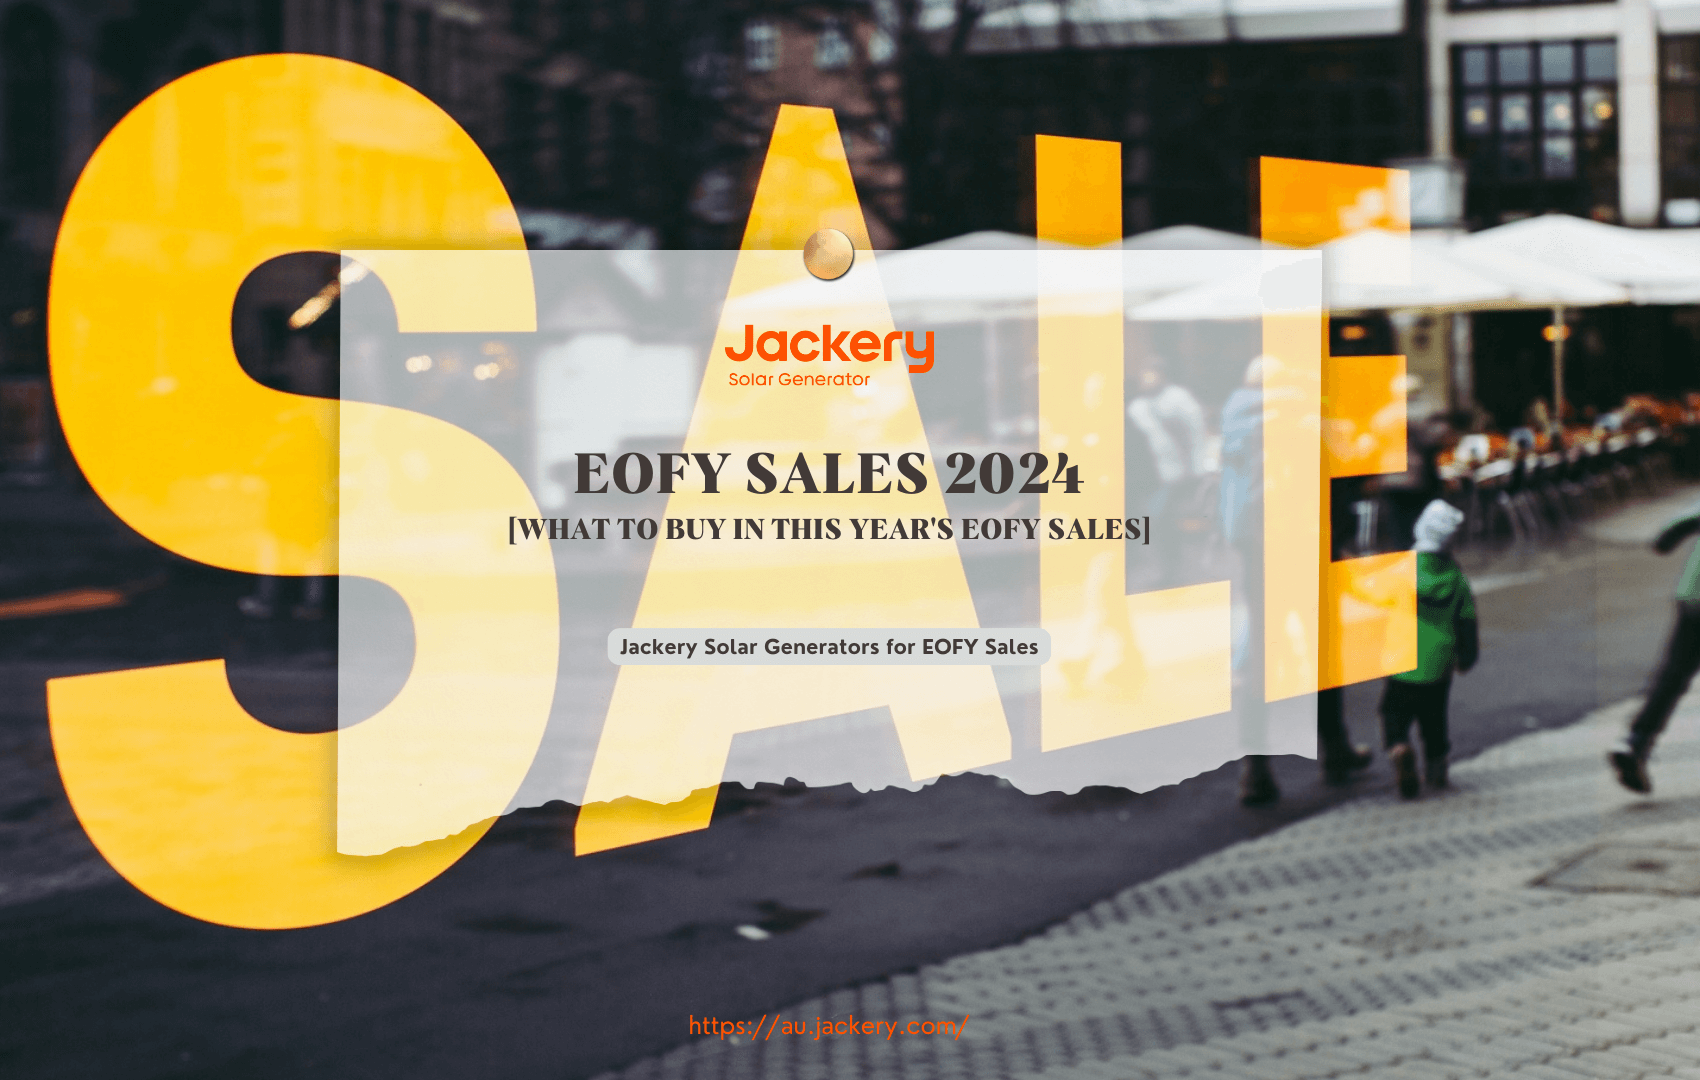 EOFY Sales 2024: What to Buy in This Year's EOFY Sales